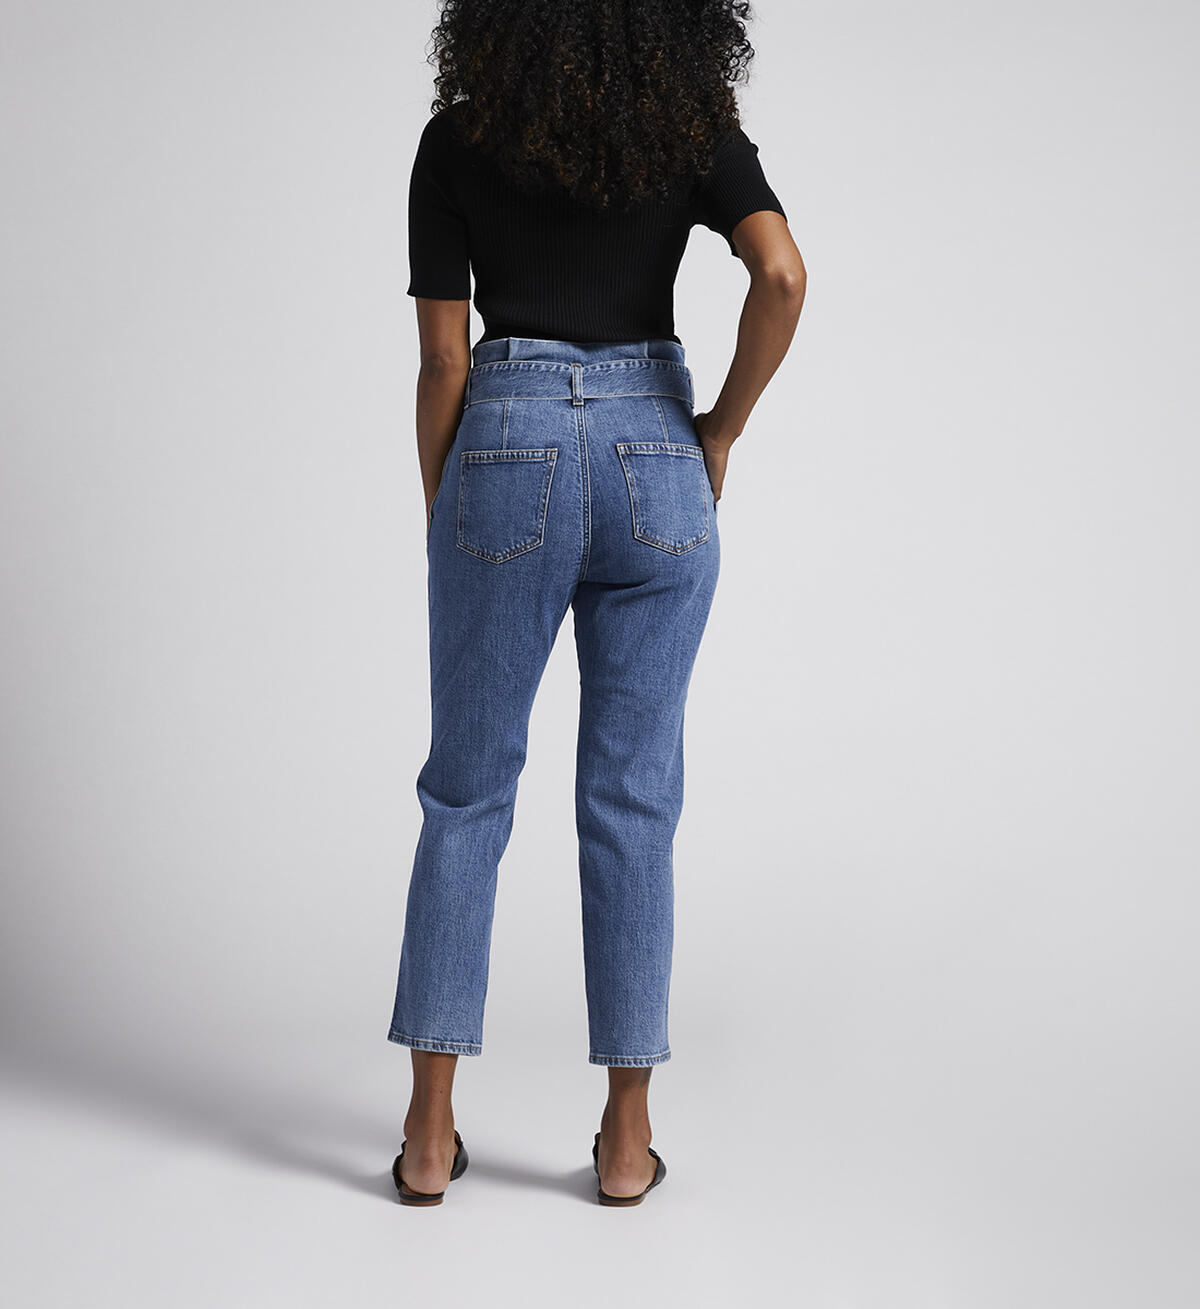 Belted Pleat High Rise Tapered Leg Pant, , hi-res image number 1